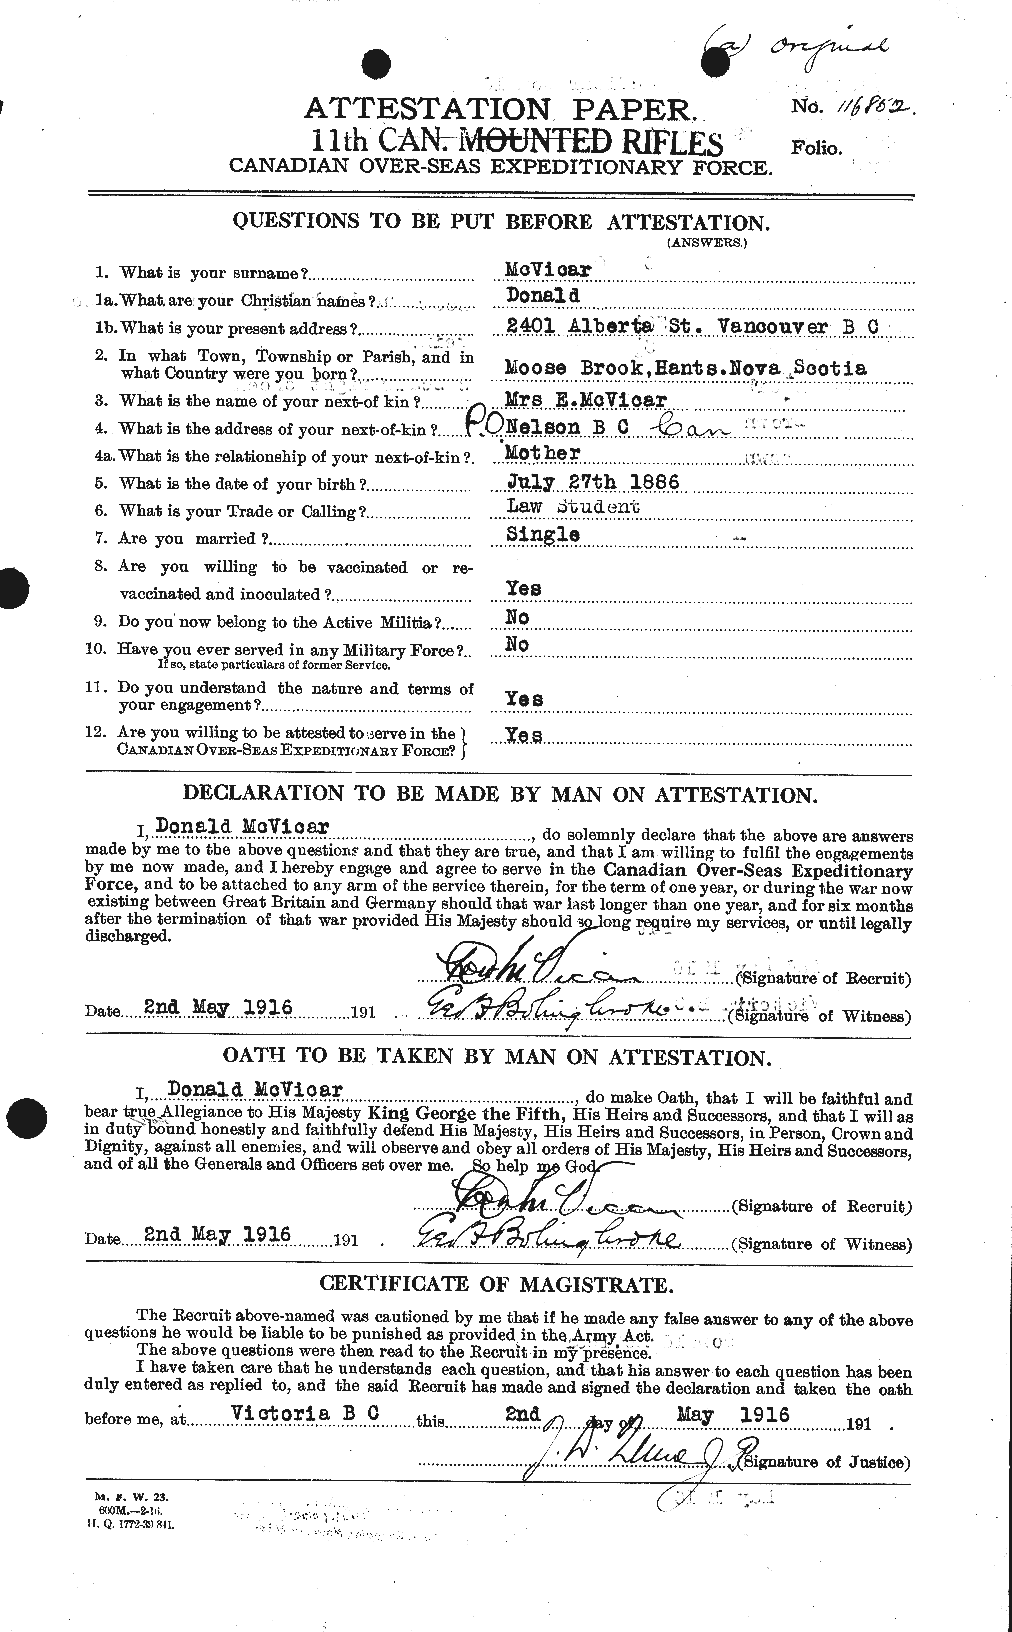 Personnel Records of the First World War - CEF 547315a